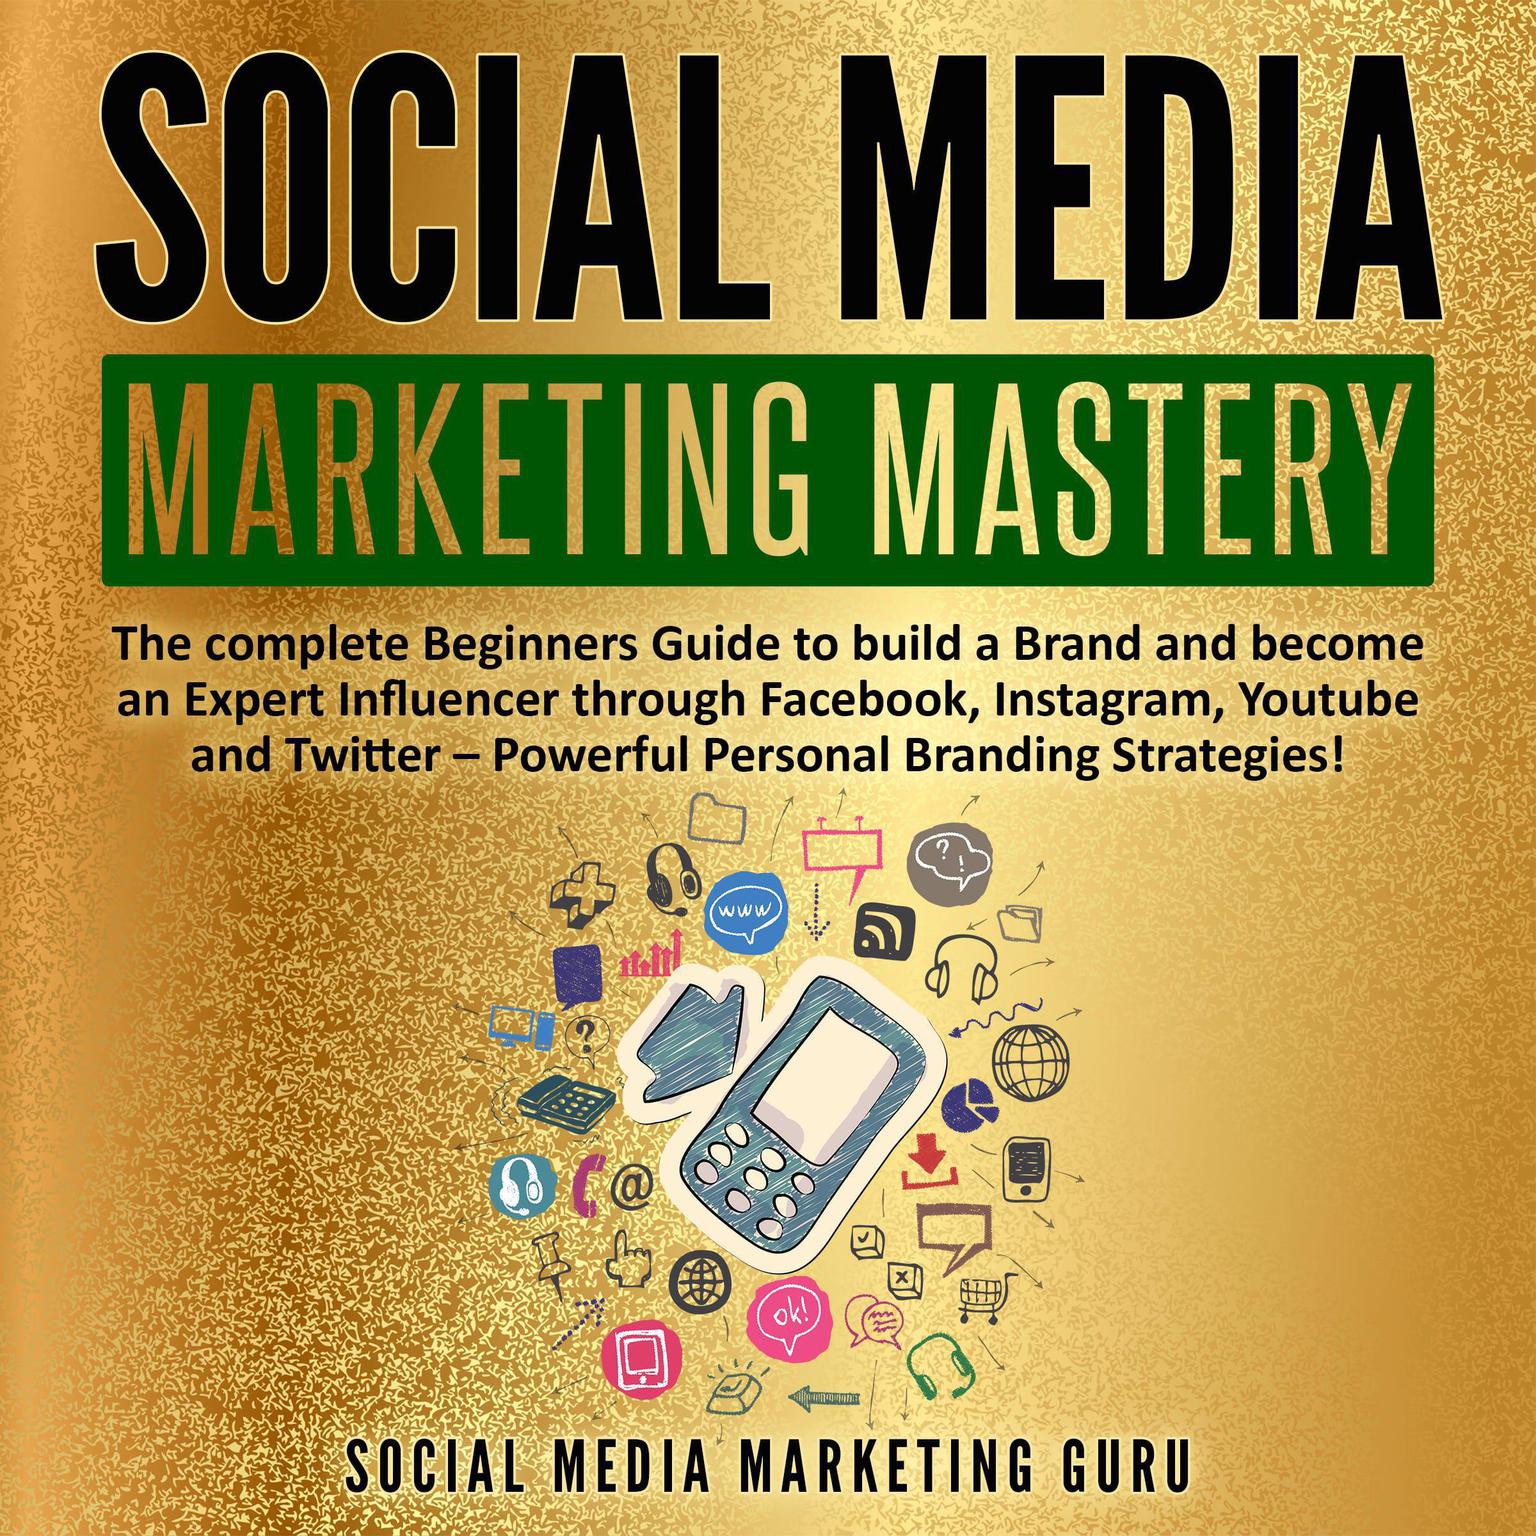 Social Media Marketing Mastery (Abridged): The Complete Beginners Guide to Build a Brand and Become an Expert Influencer through Facebook, Instagram, YouTube, and Twitter—Powerful Personal Branding Strategies! Audiobook, by Social Media Marketing Guru